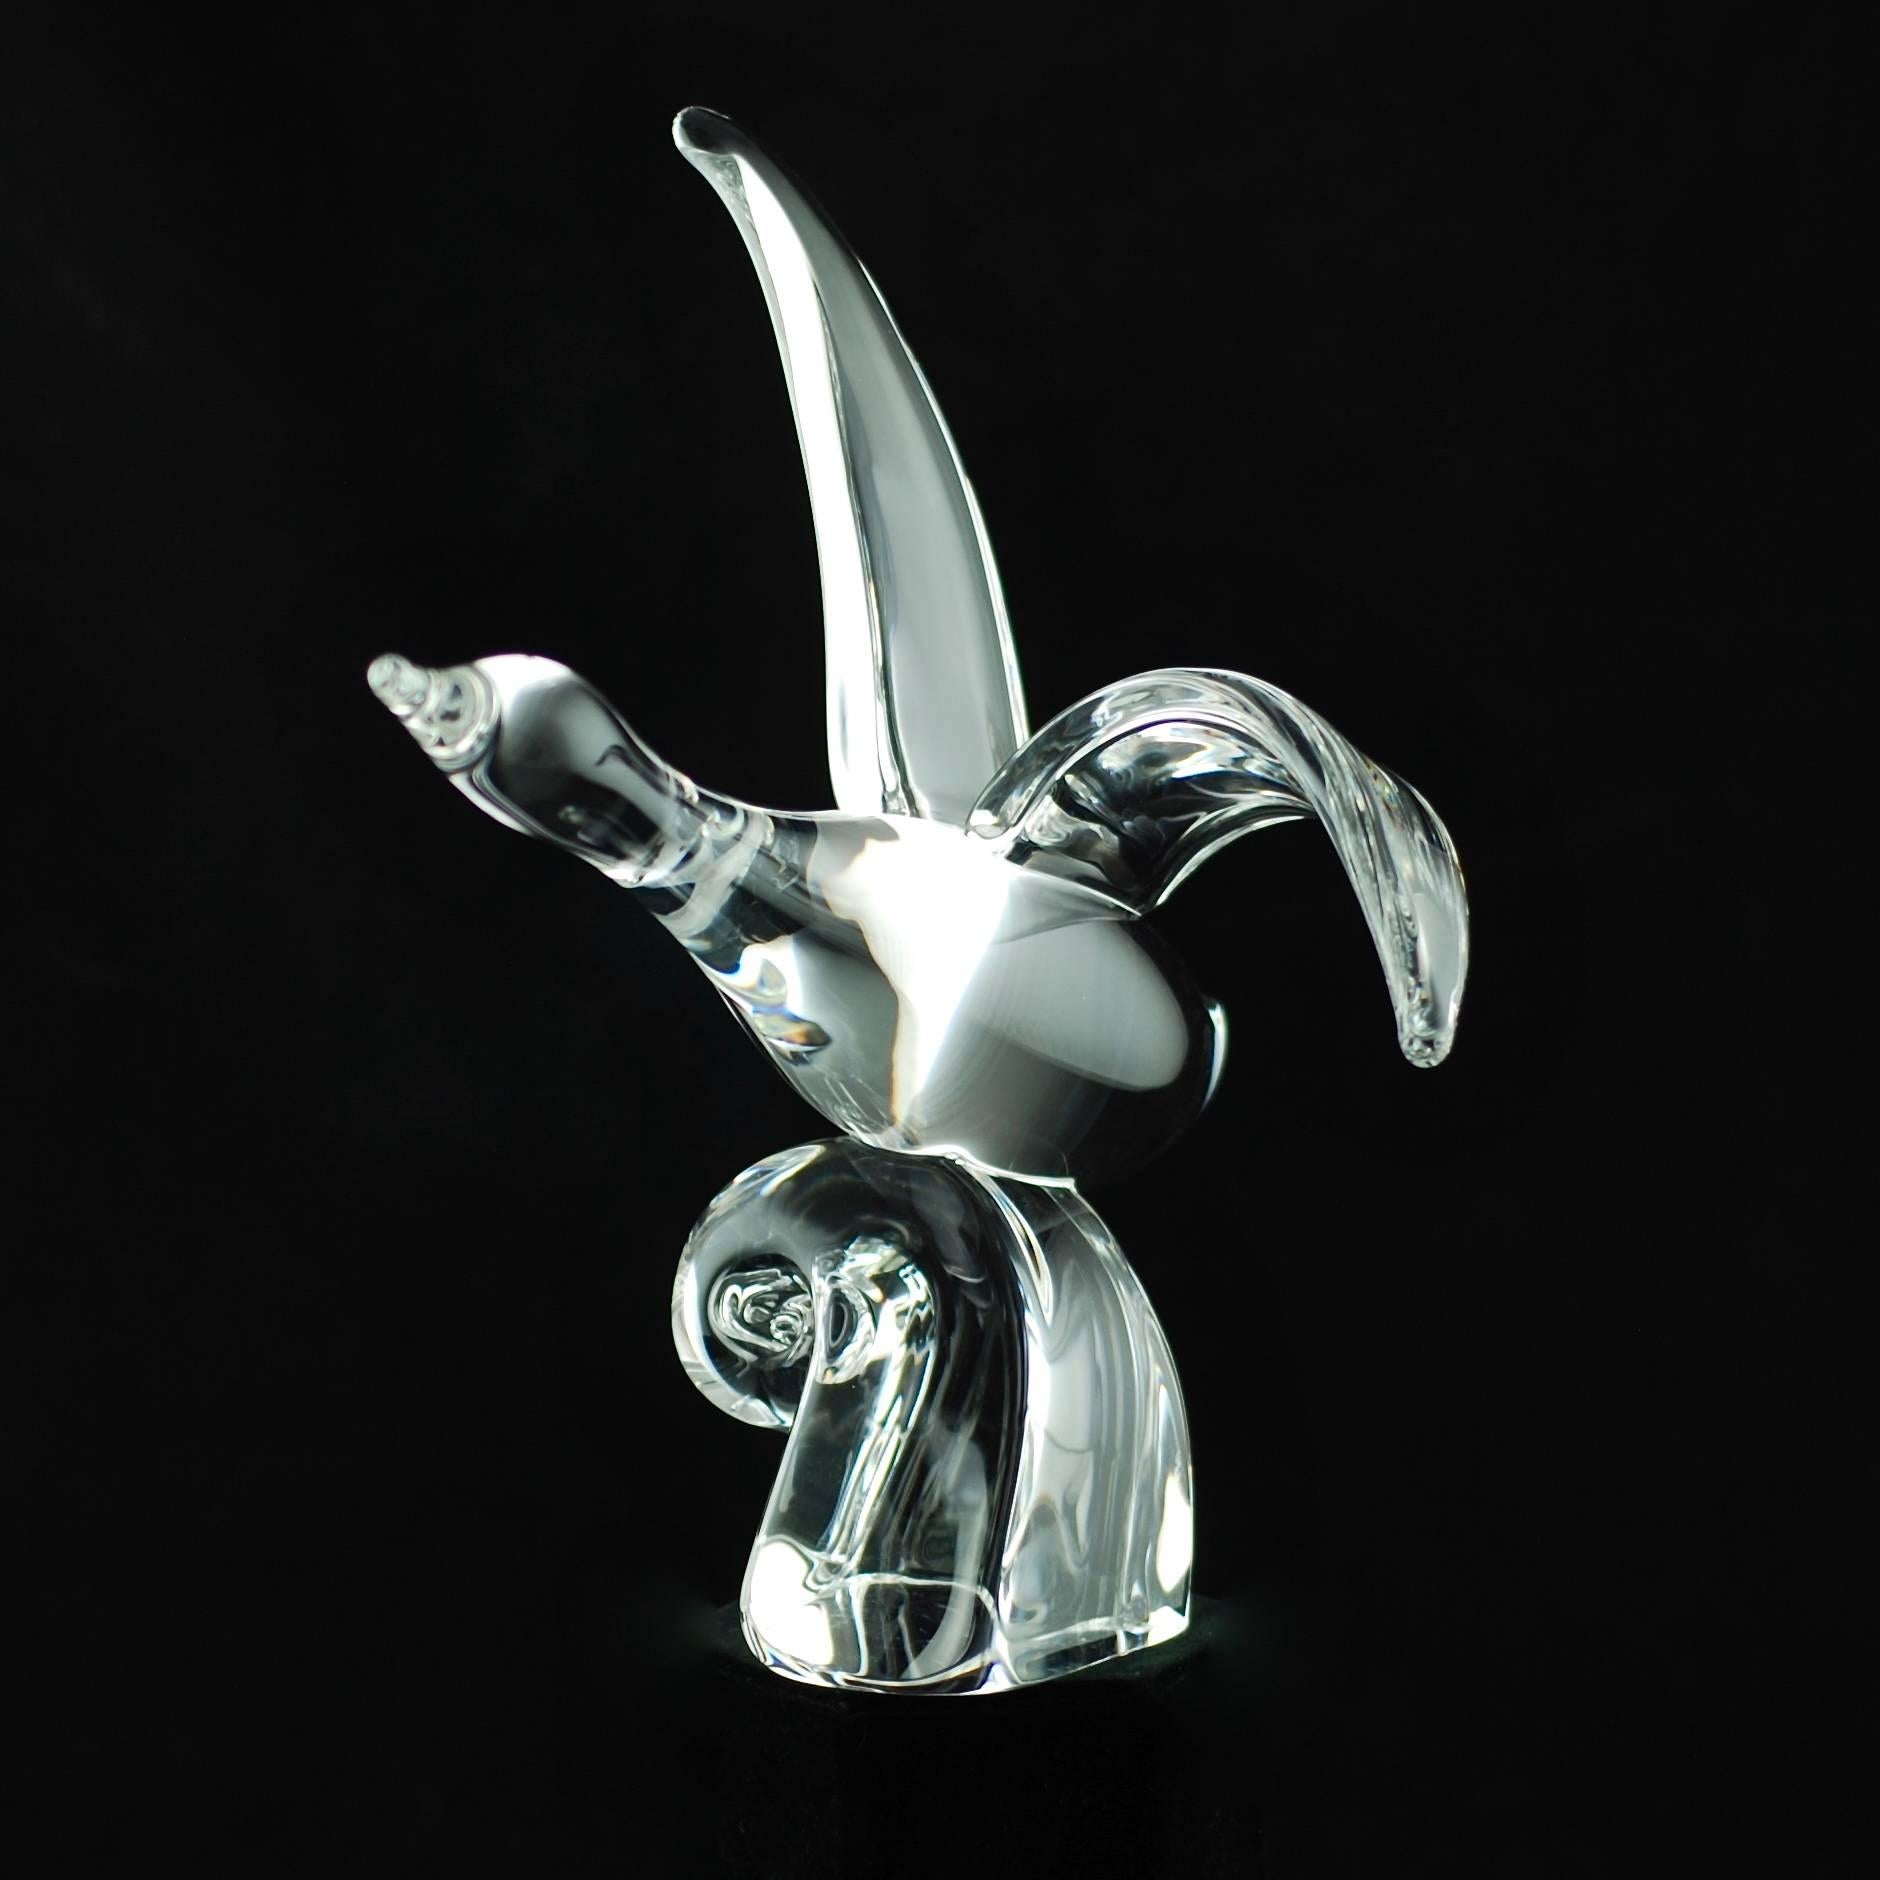 This sleek crystal bird was designed by noted Steuben glass staff designer Lloyd Atkins and depicts a water fowl on an upward trajectory with its wings extended and body skimming the top of a wave. There is an elegant symmetry to the piece with the